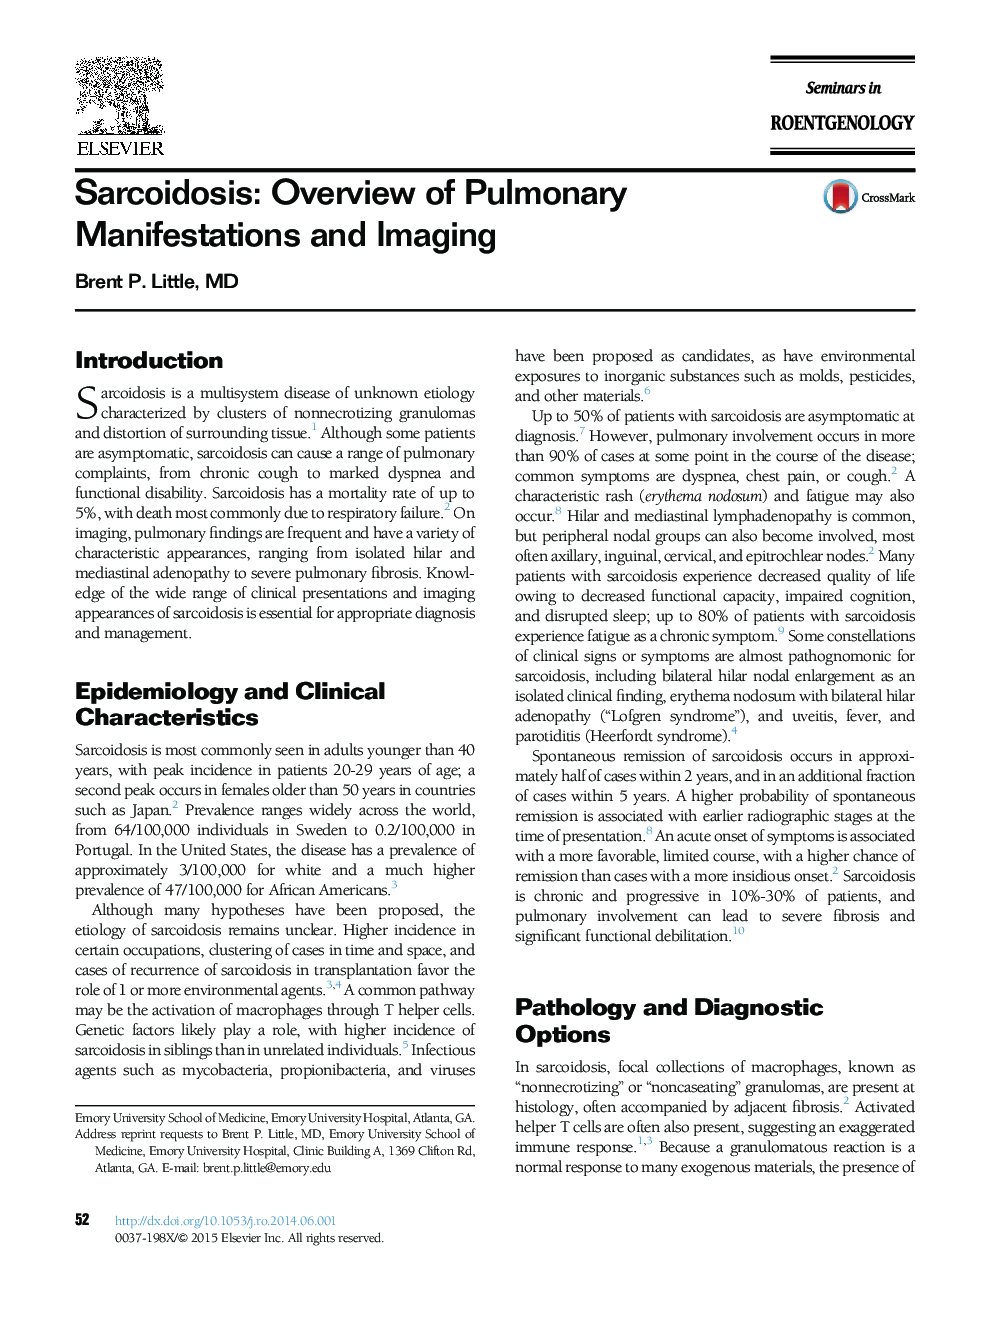 Sarcoidosis: Overview of Pulmonary Manifestations and Imaging